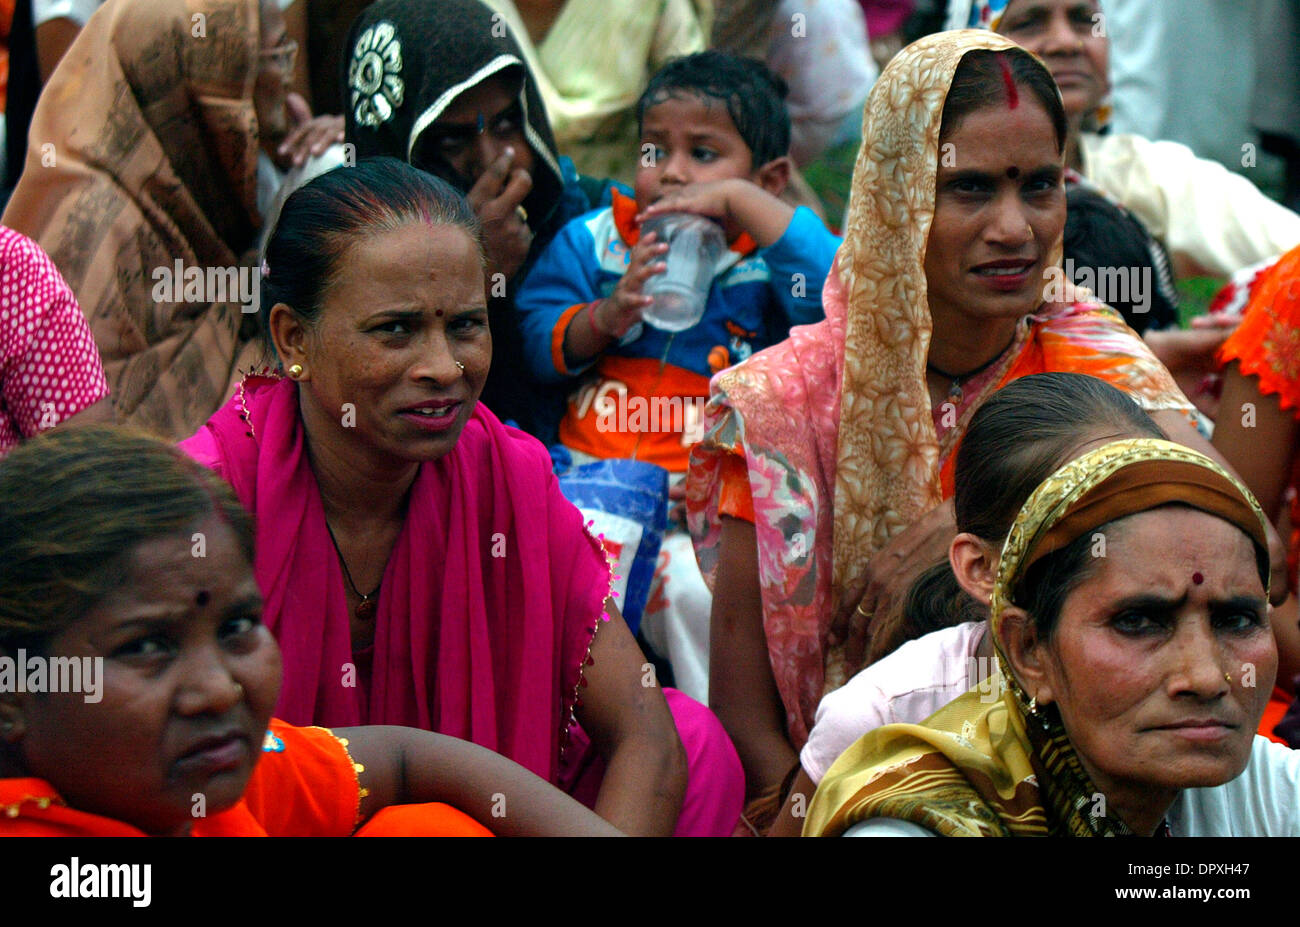 Apr 14, 2009 - New Delhi, India - Dalit Community people listen to the speech of  Indian leader of opposition Sabha (LS) and Bhartiya Janata Party's (BJP) Prime Ministerial candidate Advani during an event to mark the 118th birth anniversary of an Indian freedom fighter and the Chief architect of the Indian constitution the Late Bhimrao Ramji Ambedker.  (Credit Image: © M Lakshman/ Stock Photo